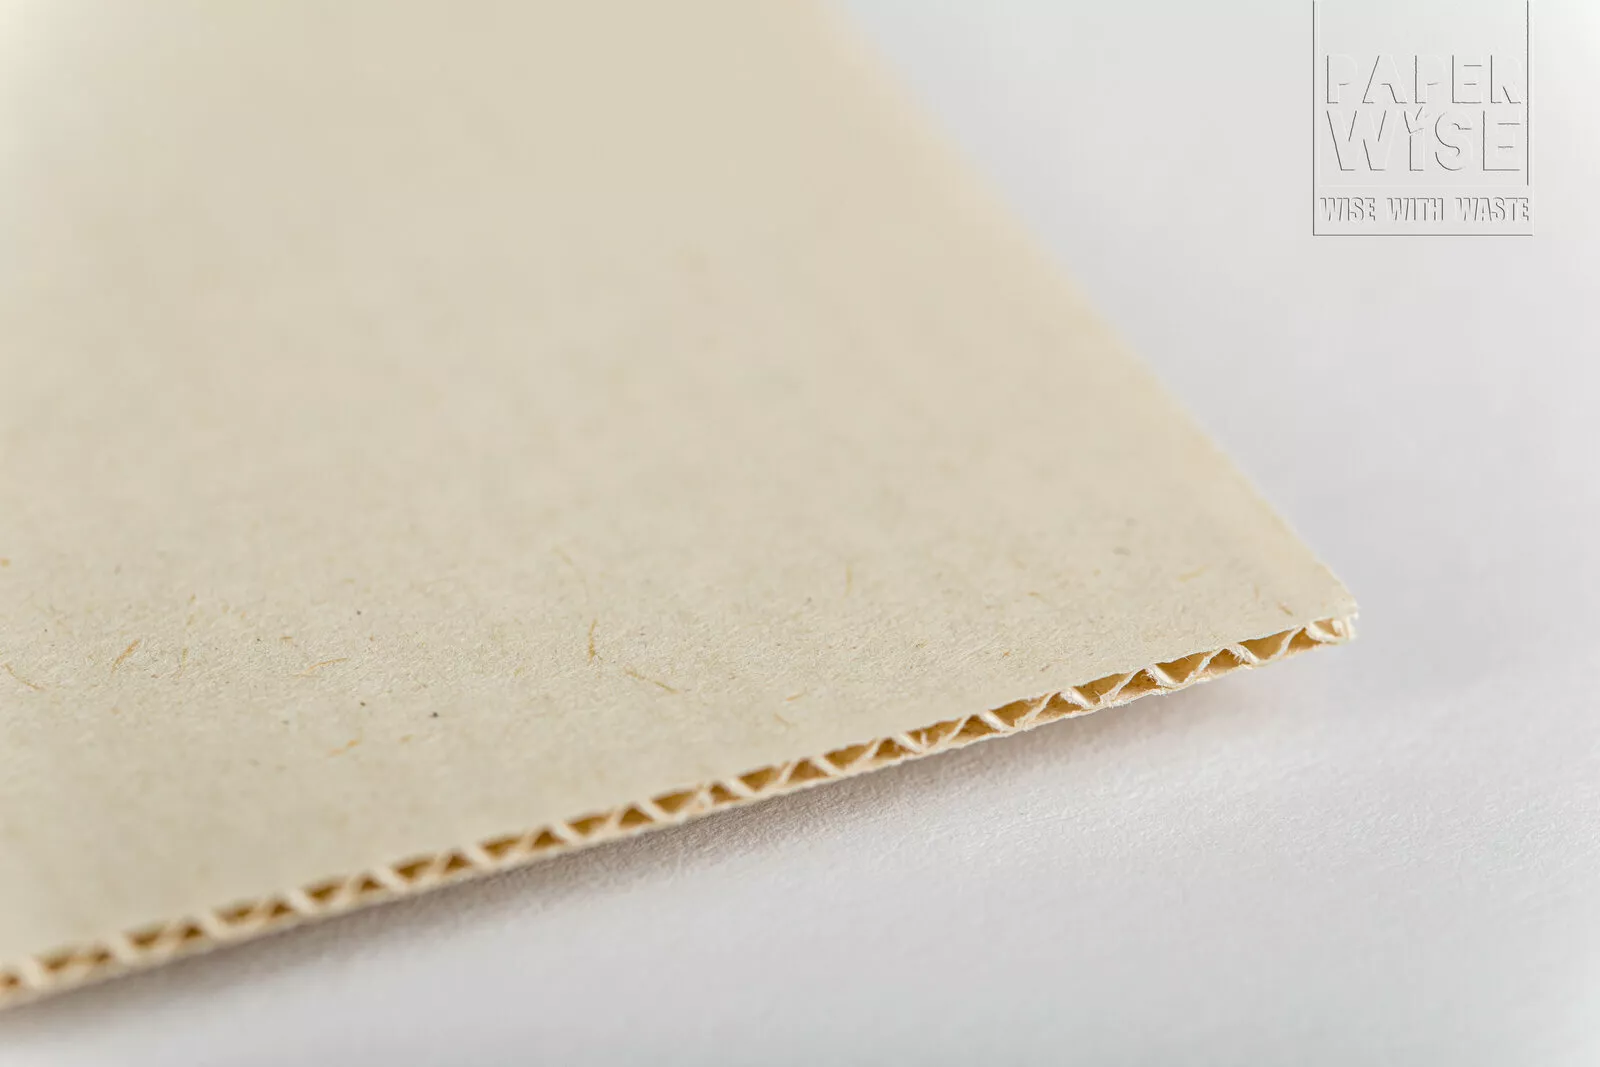 PaperWise sustainable natural micro corrugated cardboard example closp packaging